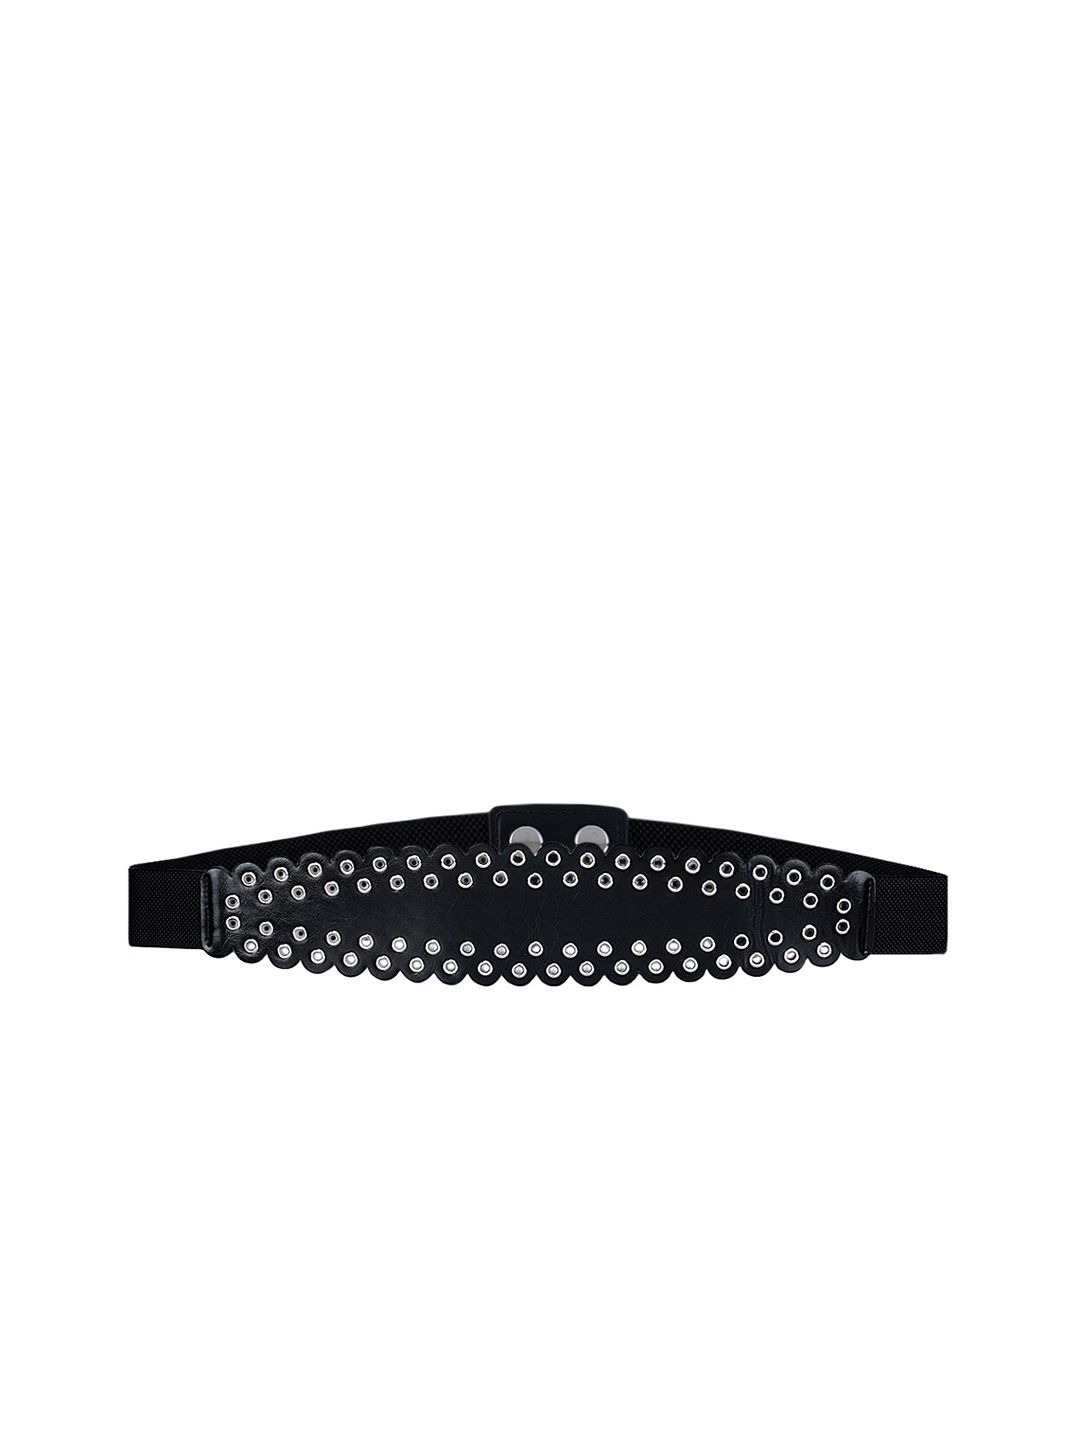 Kazo Women Black Broad Belt With Silver Rivet Details Price in India